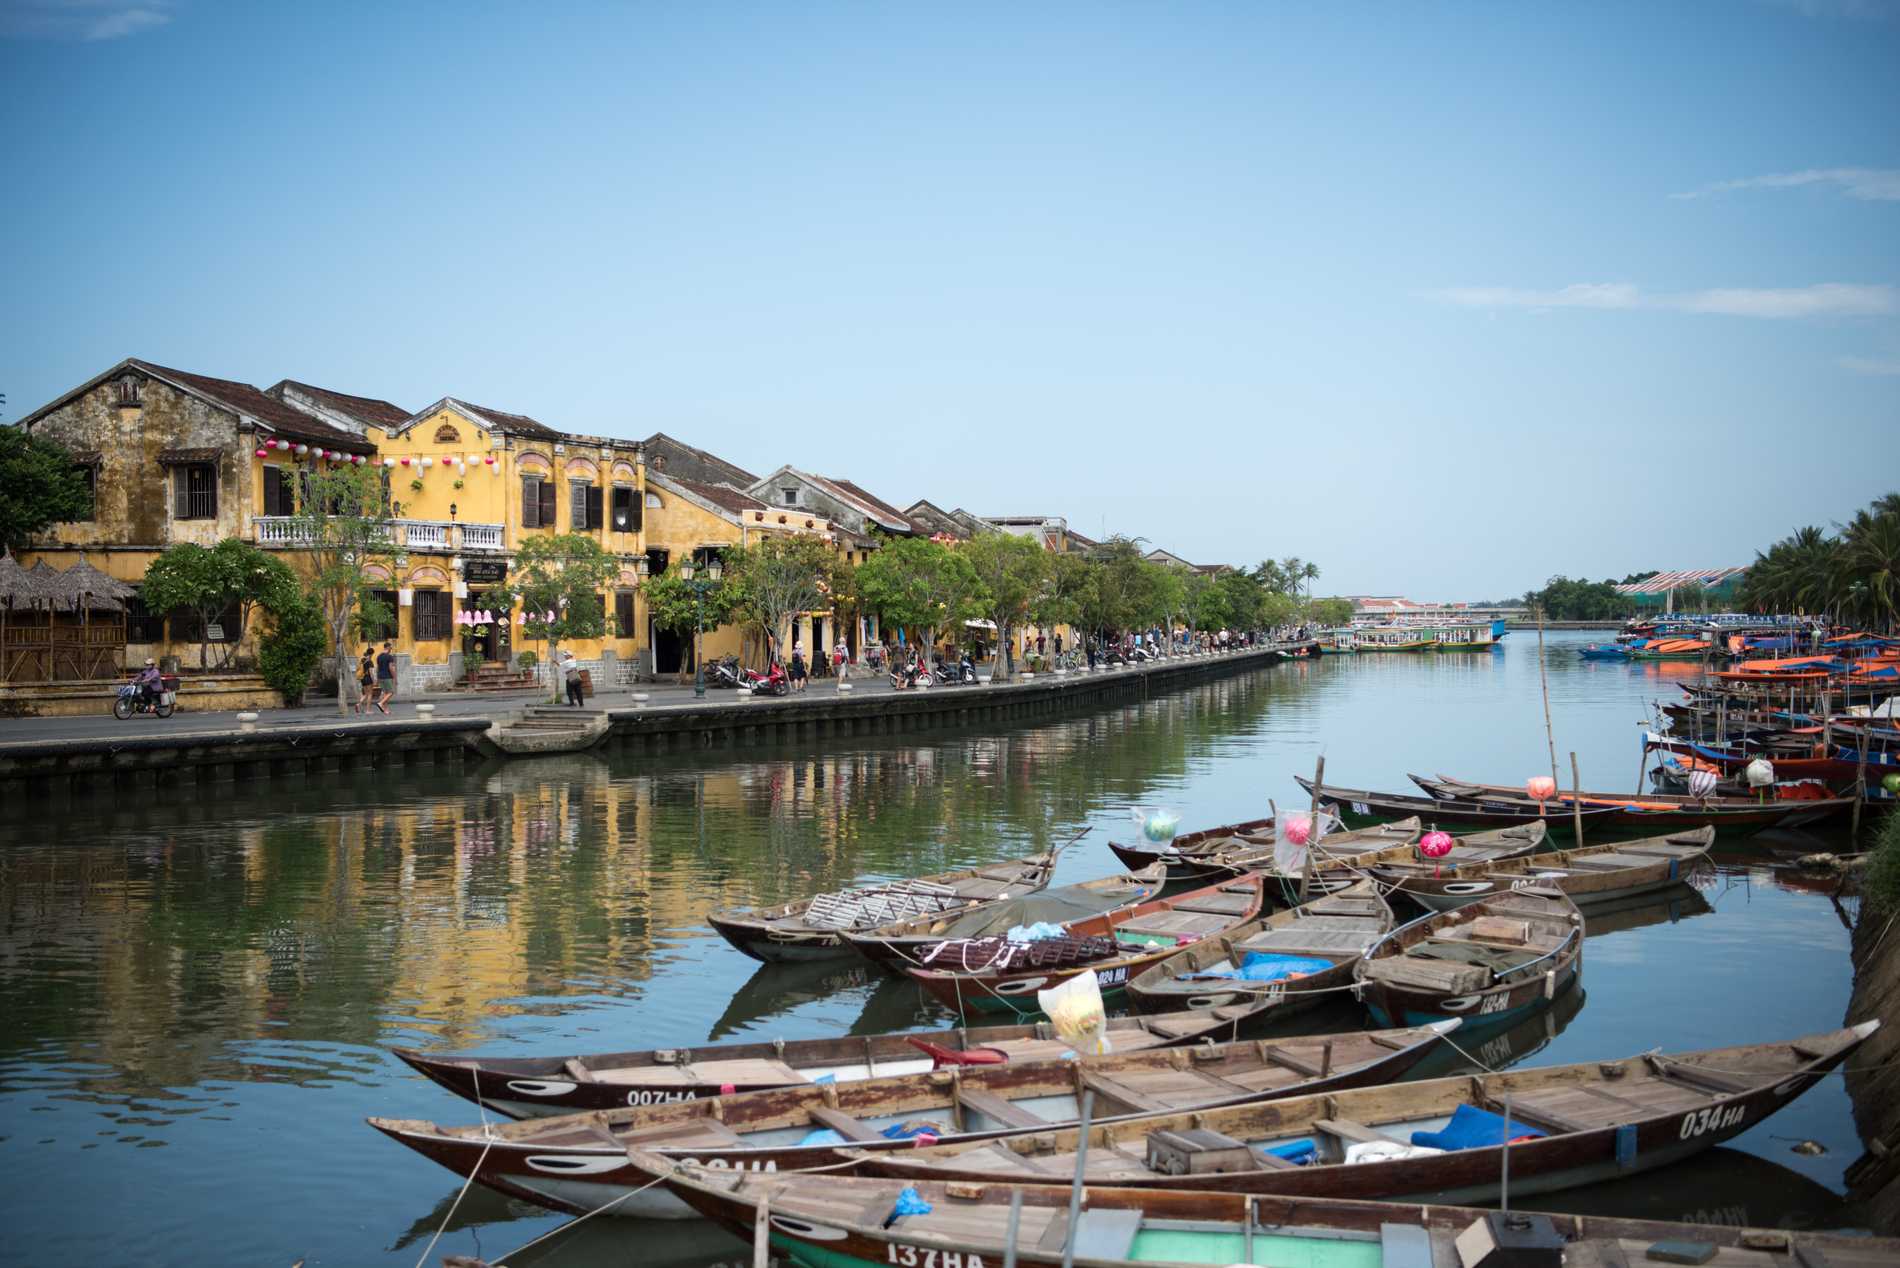 Boats moored up by the side of the river in Hoi An as the traditional yellow buildings reflect in the water.